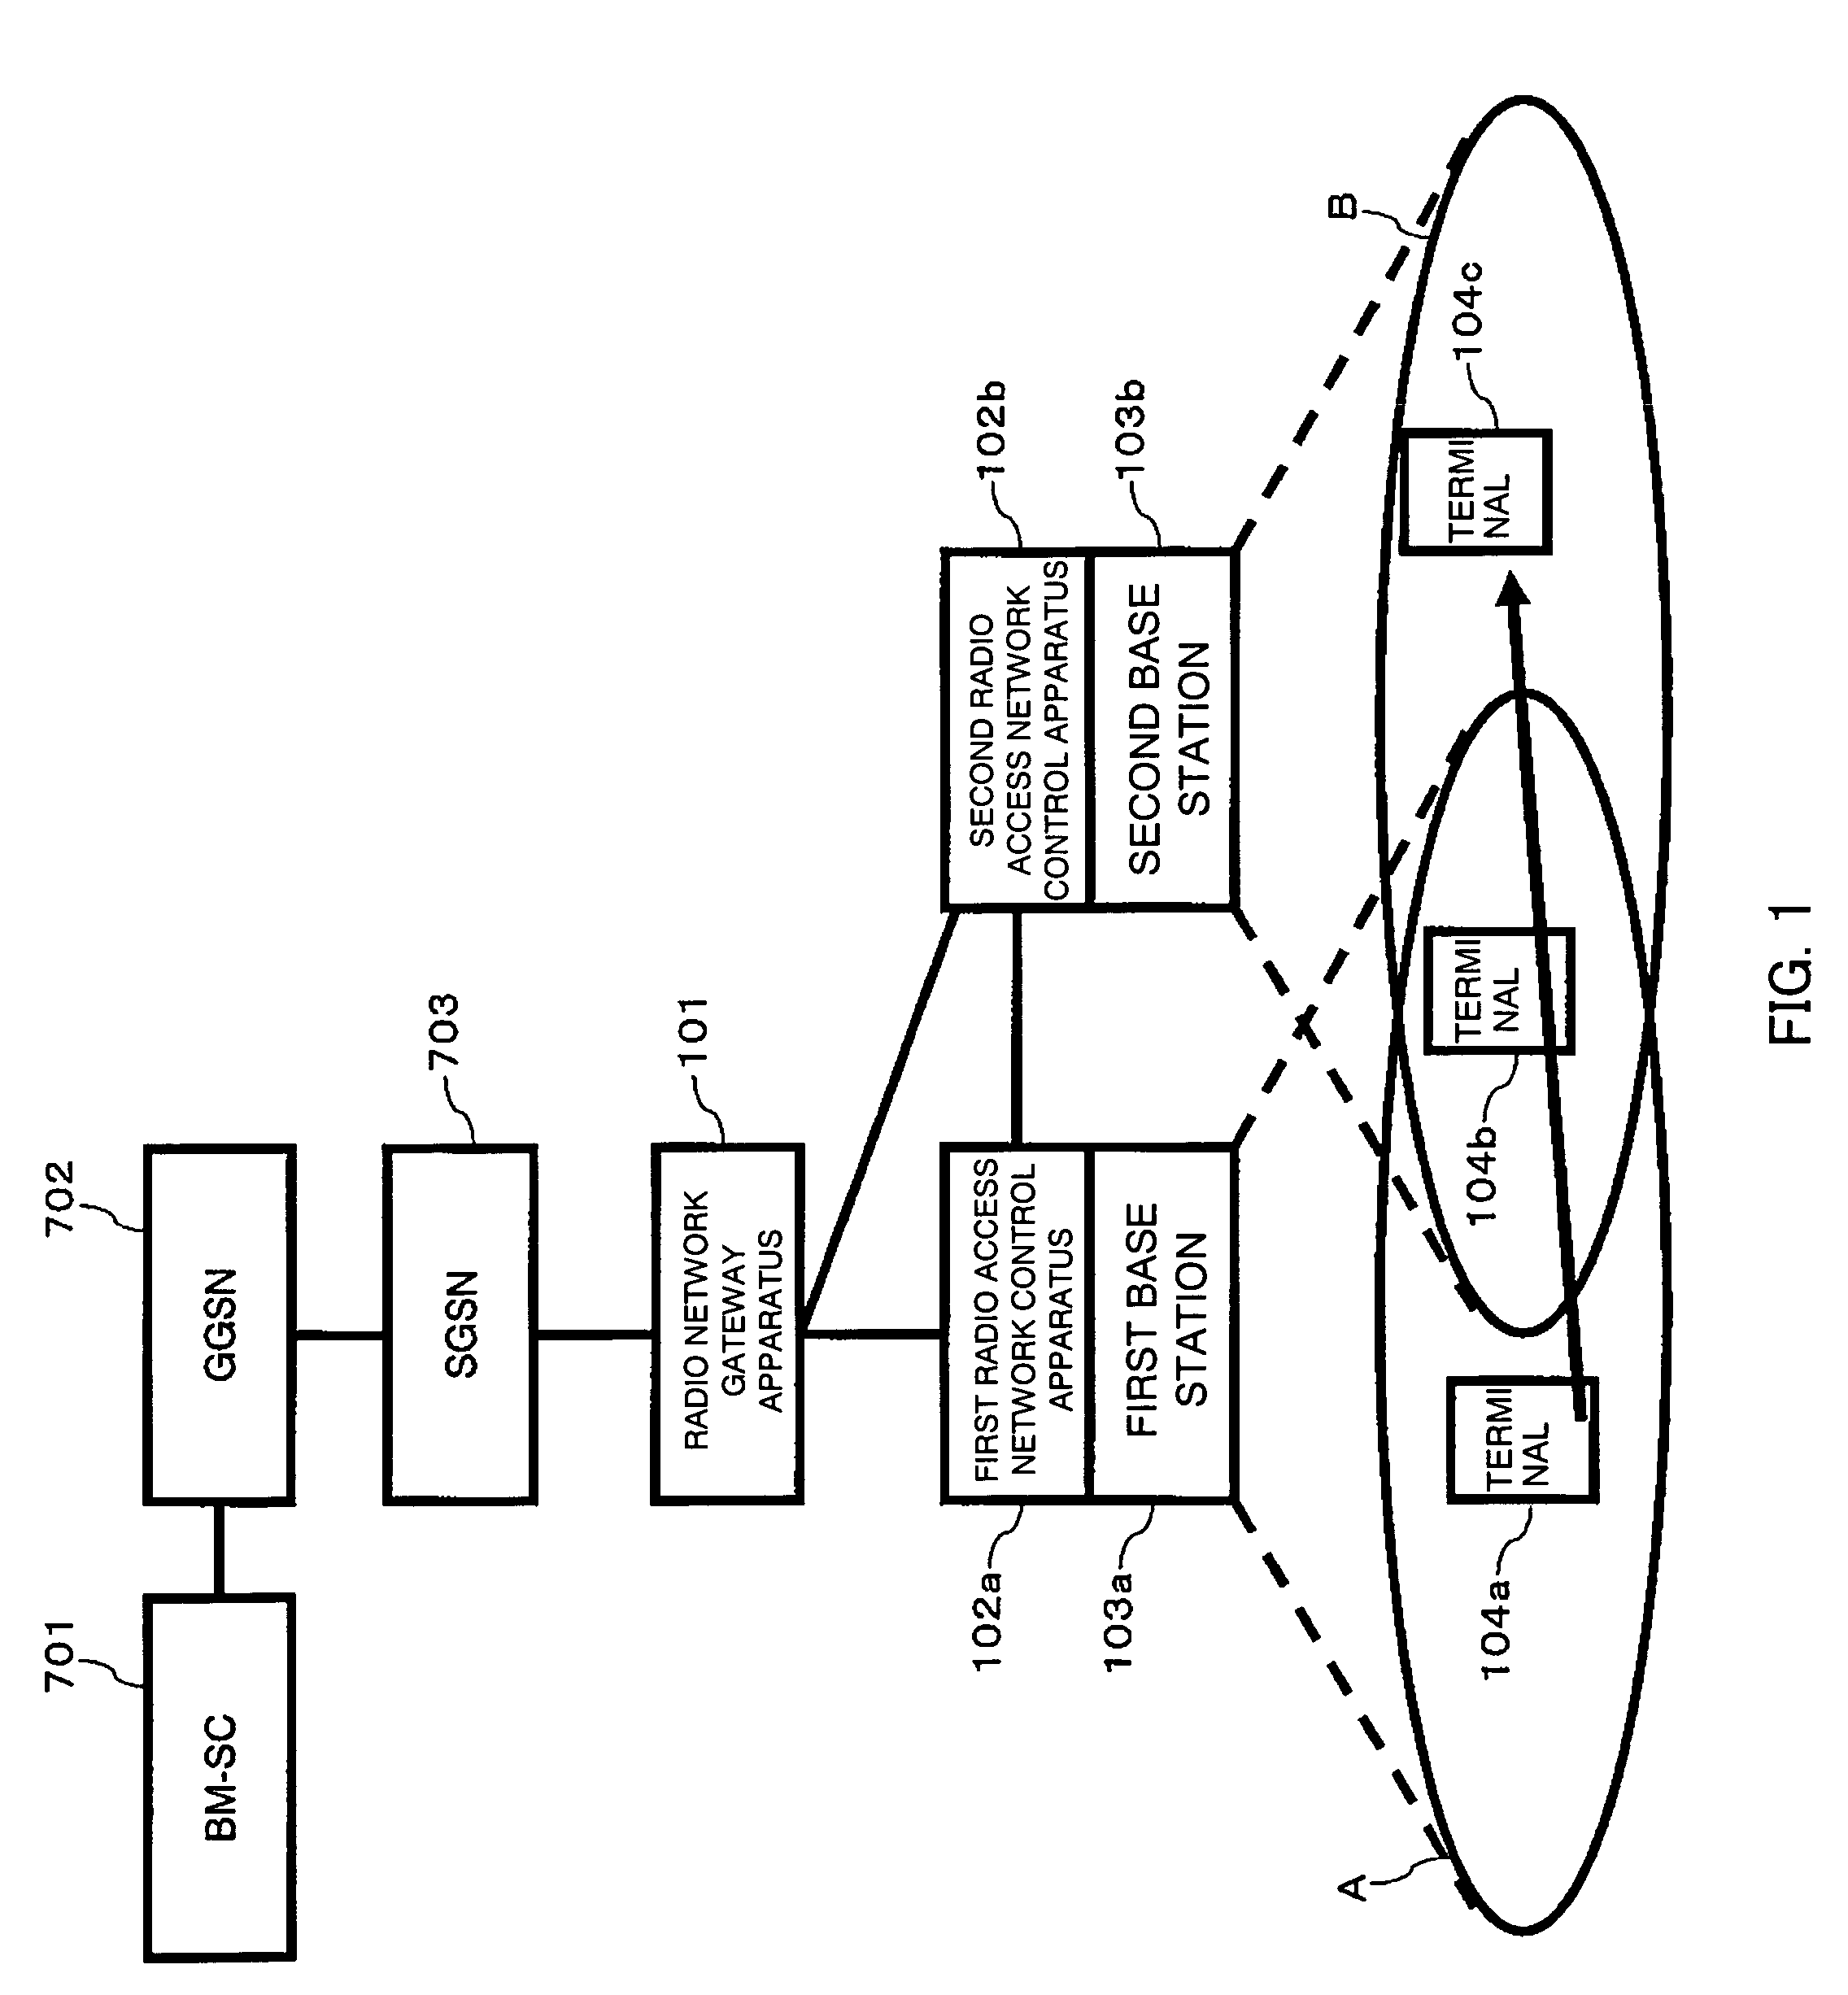 Handoff method comprising network control apparatus that receives data packets from both the core network and the other network control apparatus wherein said received data packets will be transformed into wireless data